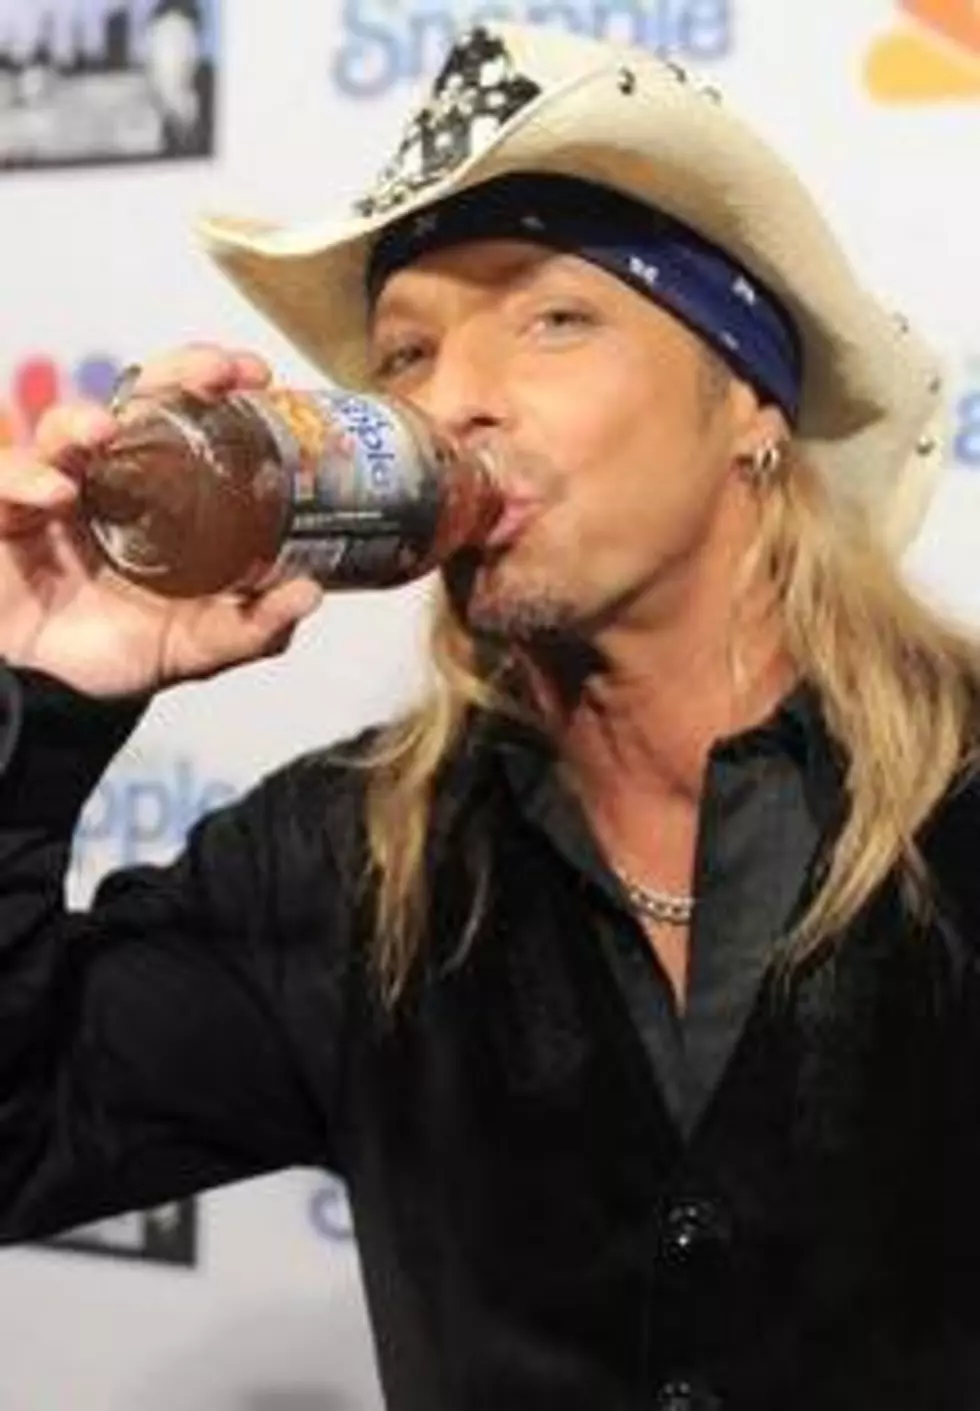 2-4-1 Tickets For Bret Michaels TODAY ONLY